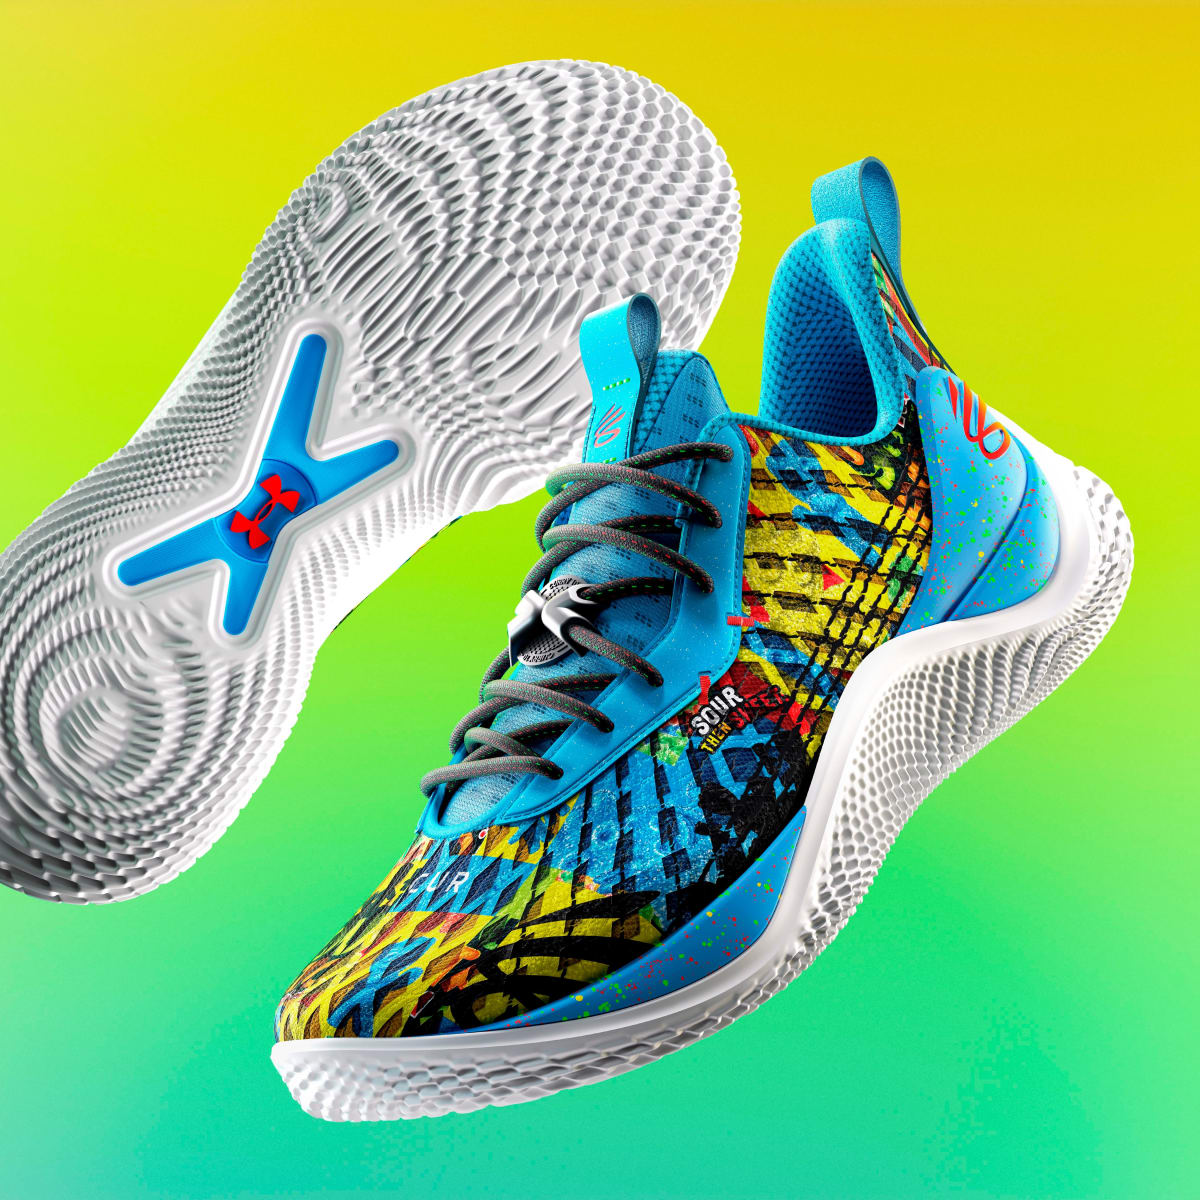 Coolest Kd Basketball Shoes